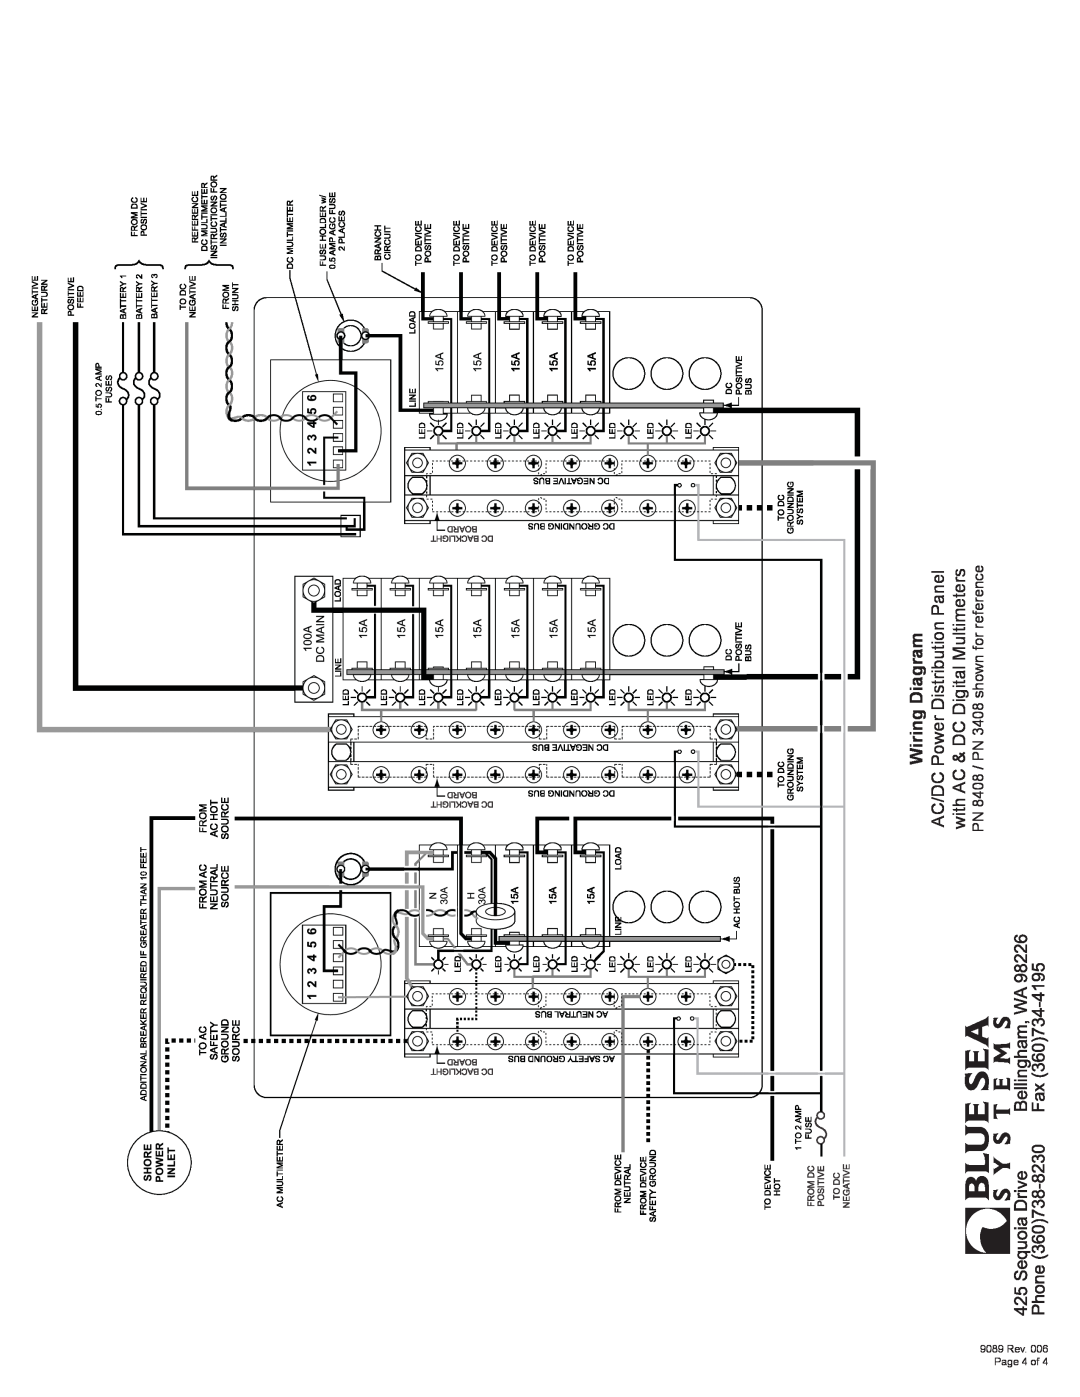 Blue Sea Systems PN 8408 dimensions Wiring Diagram, Page, 9089 Rev, 0.5 TO 2 AMP, Fuses, 1 TO 2 AMP 